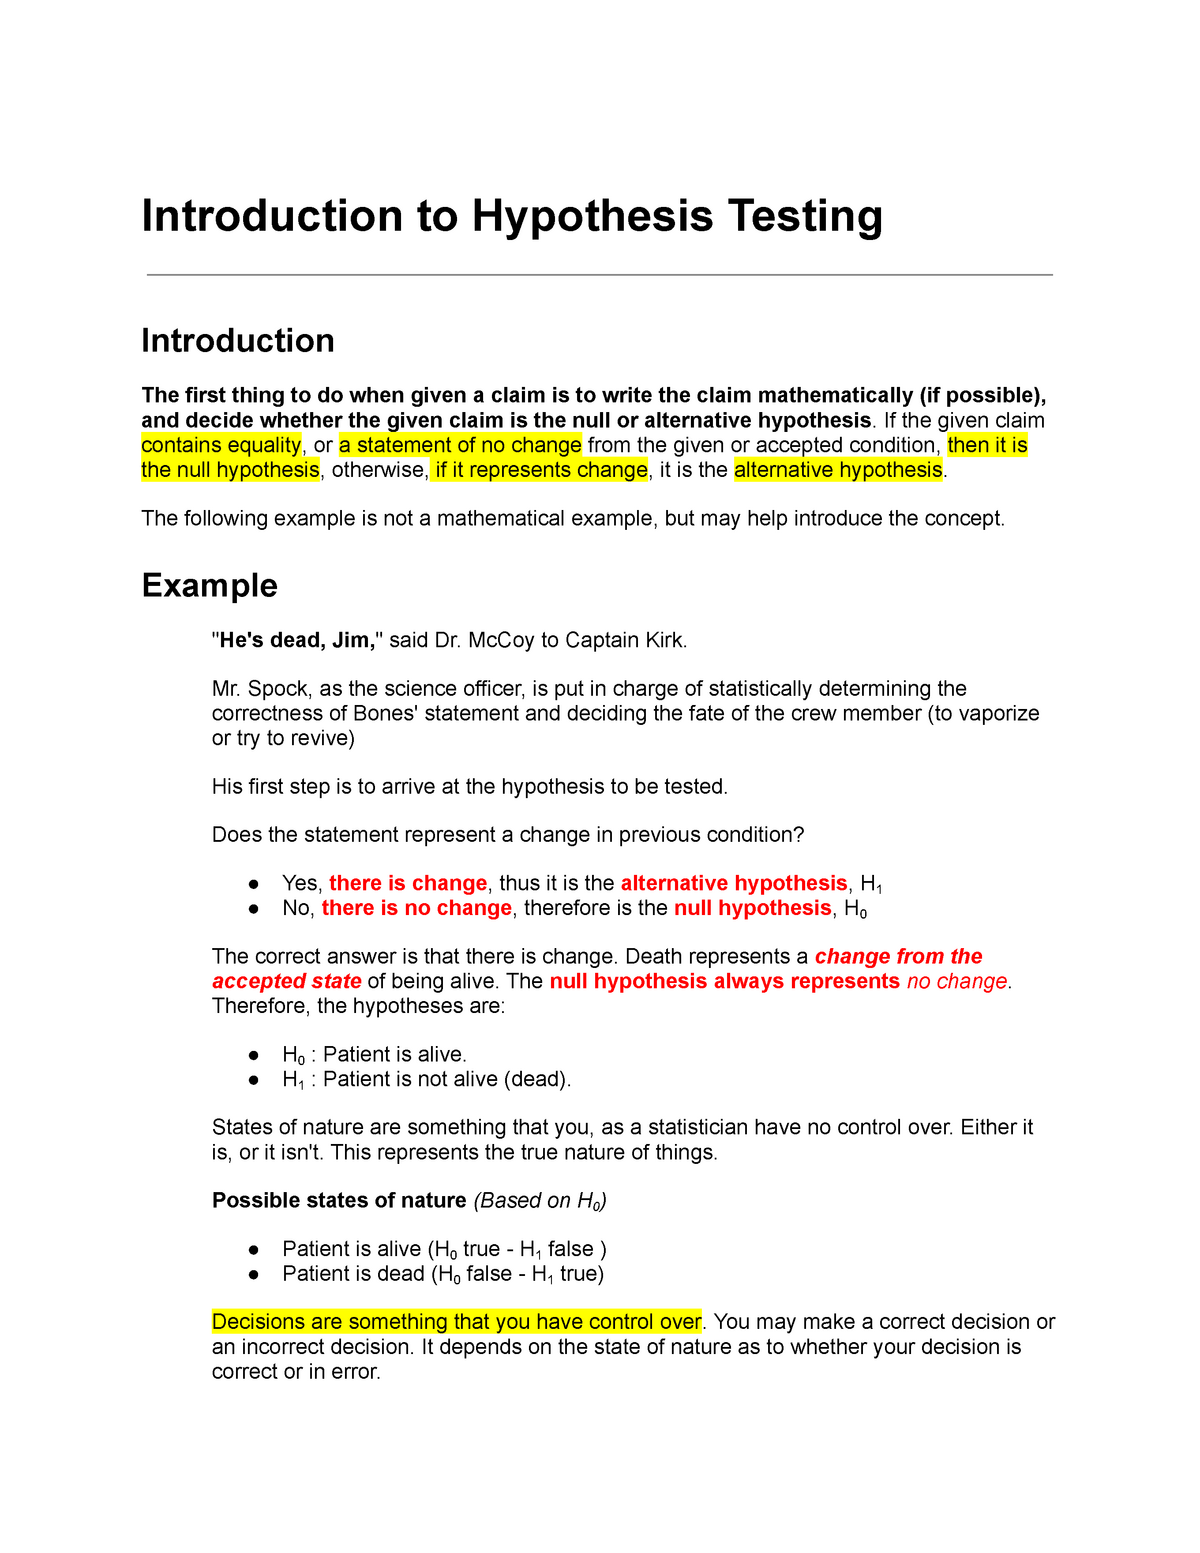 hypothesis in introduction